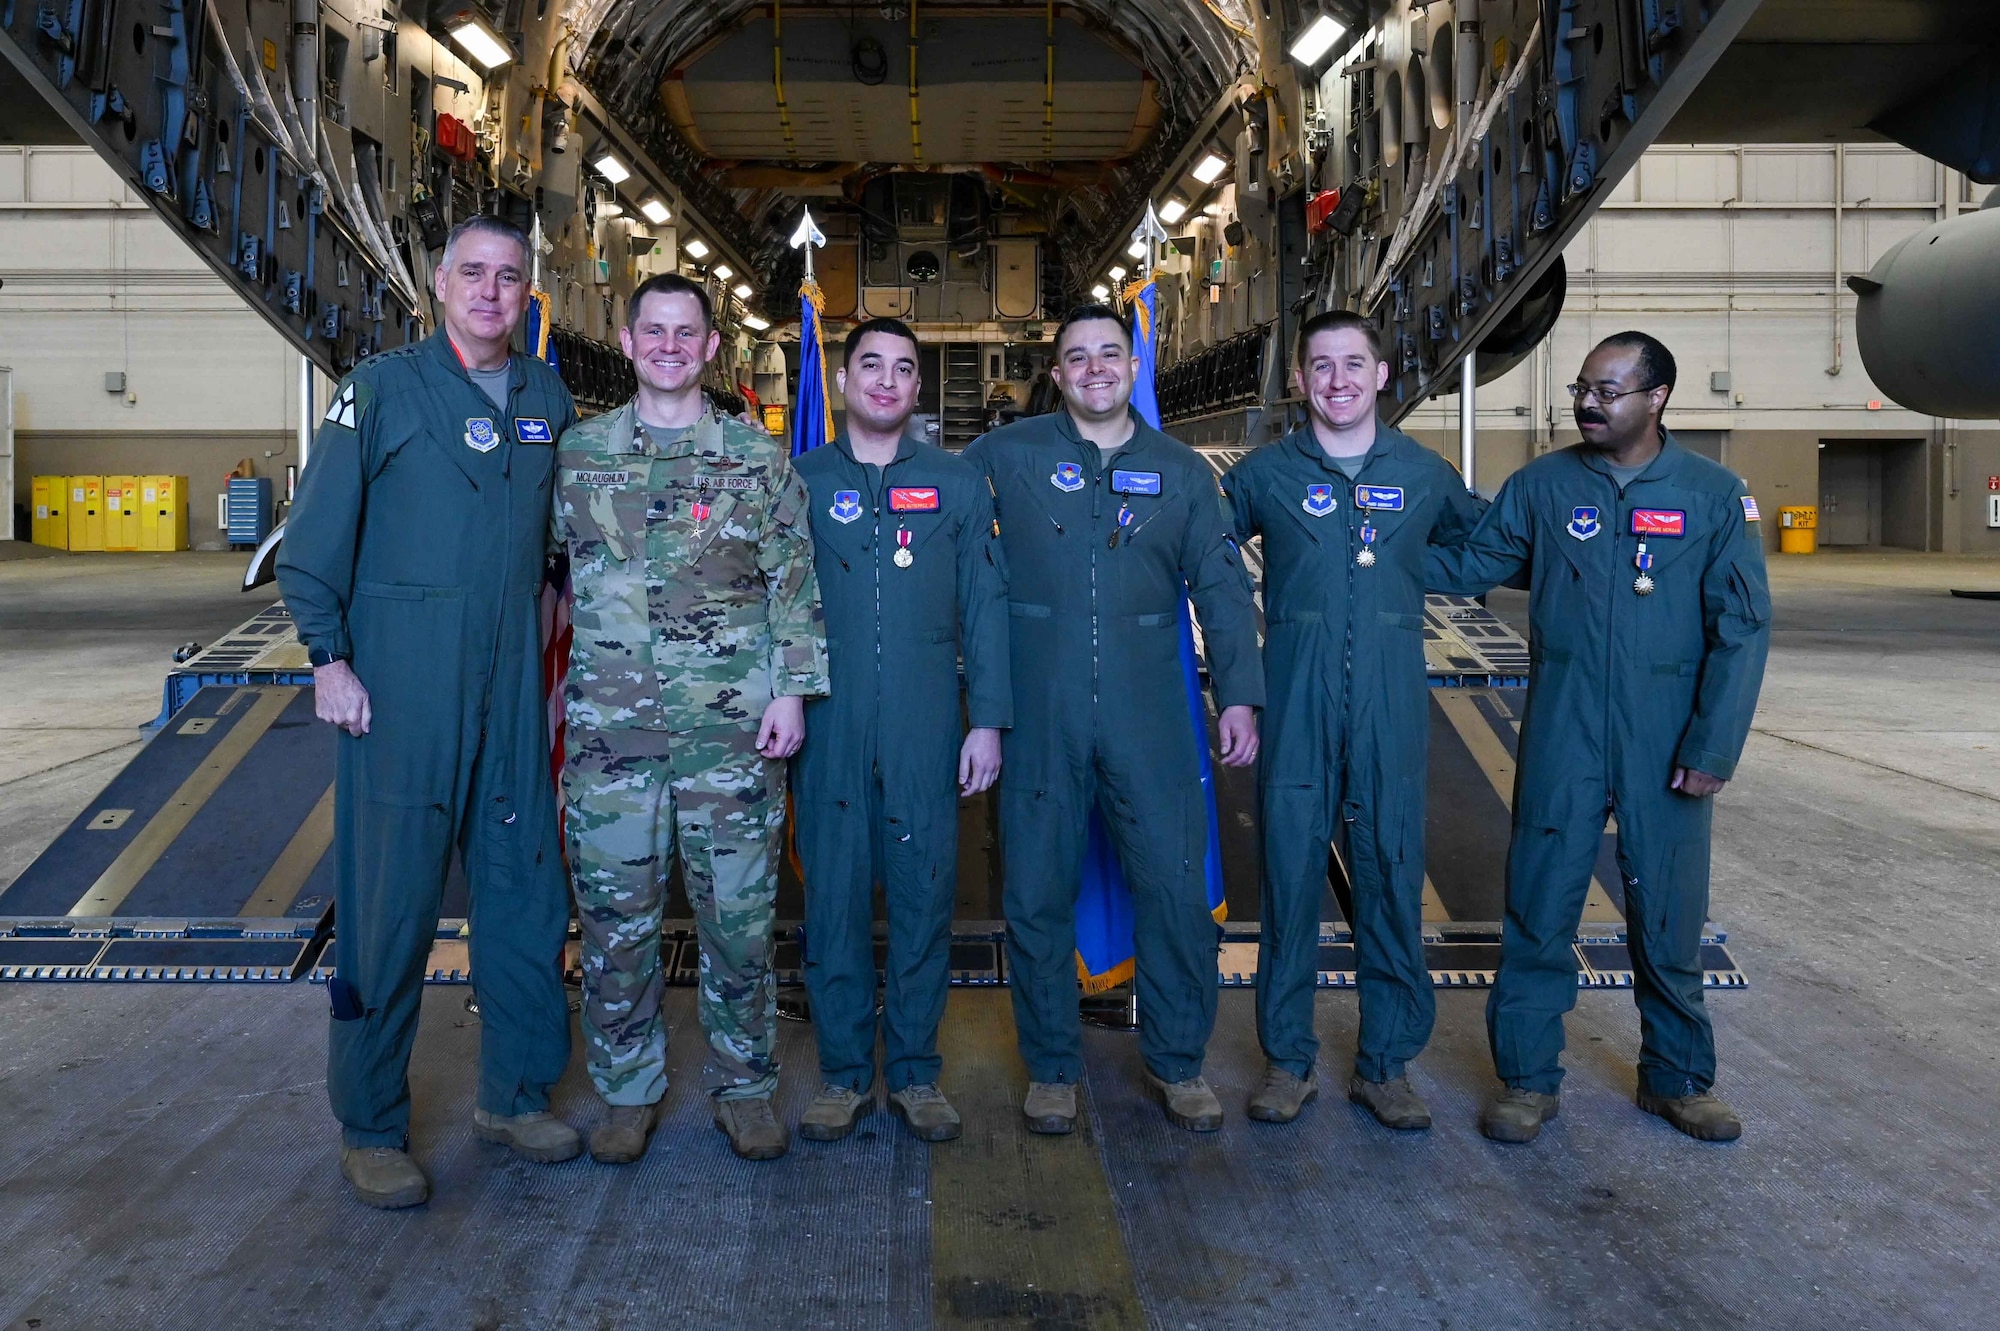 U.S. Air Force Gen. Mike Minihan, Air Mobility Command commander, poses for a photo with Airmen from the 97th Air Mobility Wing at Altus Air Force Base, Oklahoma, Feb. 2, 2024. The Airmen were awarded for their efforts during Operation Allies Refuge, the largest Non-combatant Evacuation Operation airlift in U.S. history. (U.S. Air Force photo by Airman 1st Class Kari Degraffenreed)